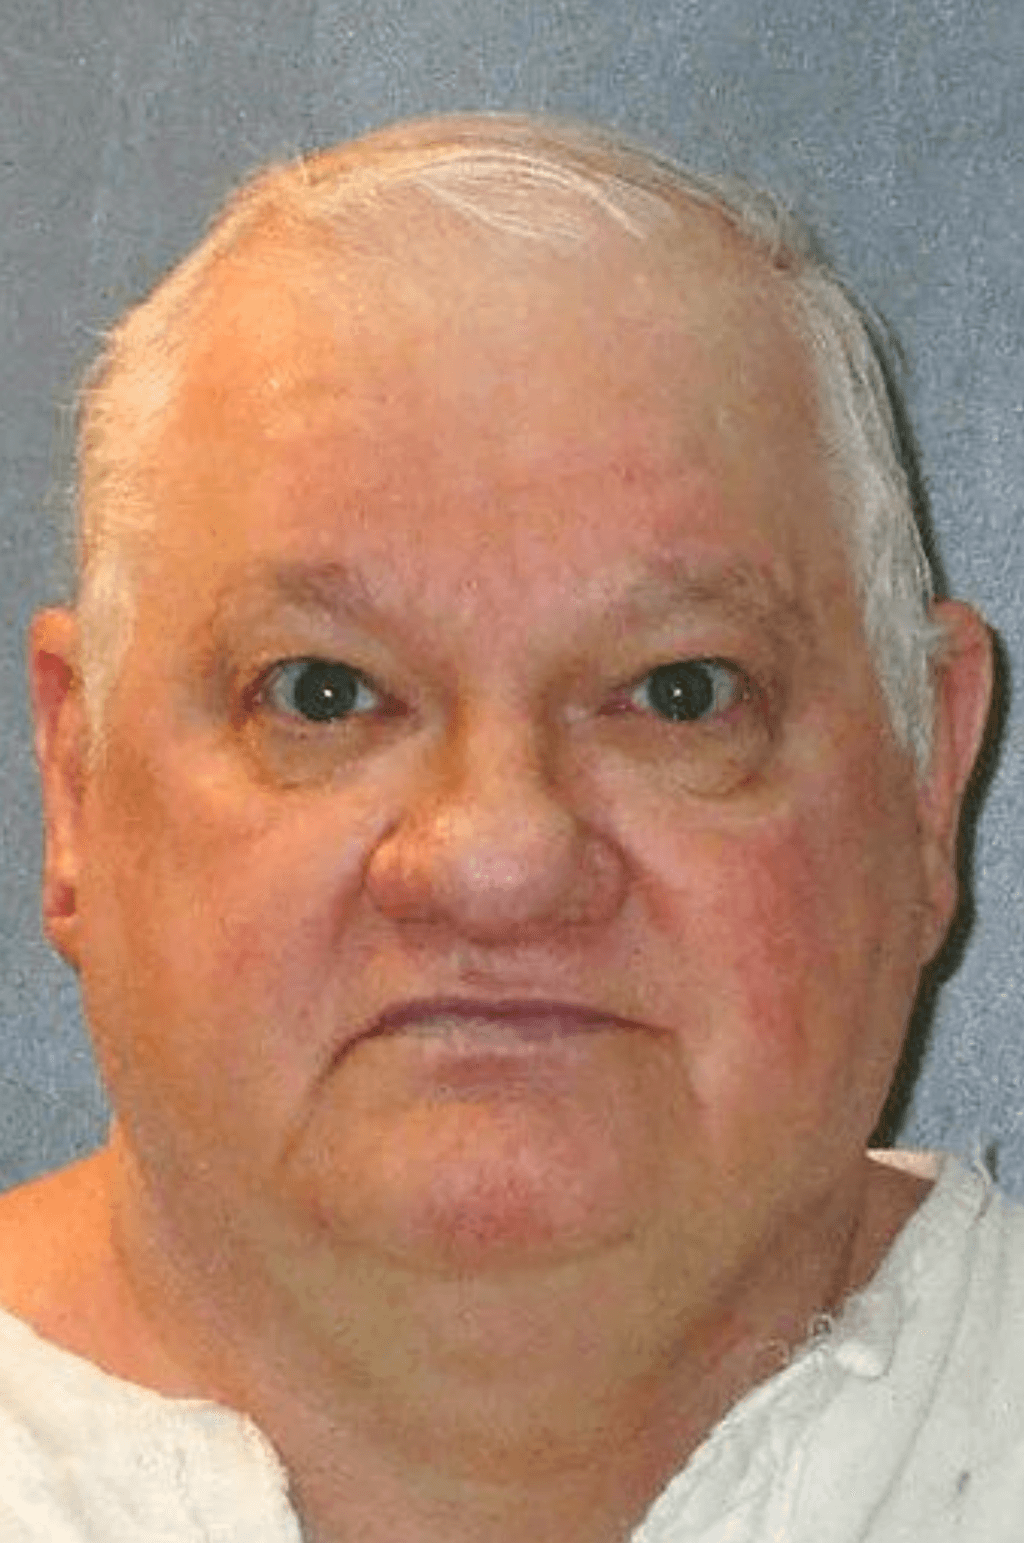 Texas Executes Defendant Who Had Been Represented by “Cut-and-Paste” Appeals Lawyer